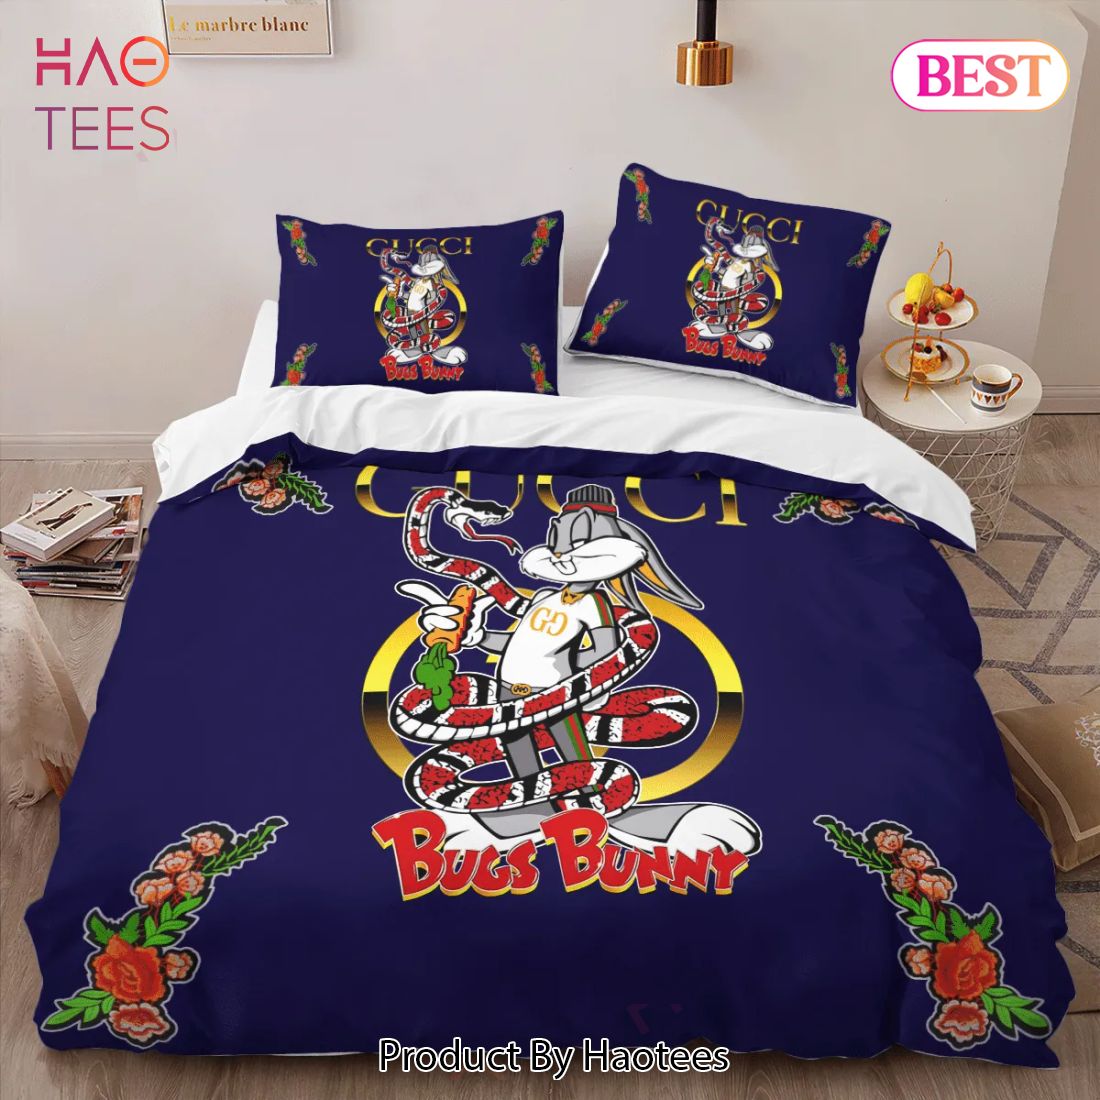 HOT Bugs Bunny Louis Vuitton Luxury Brand 3D T-Shirt Limited Edition